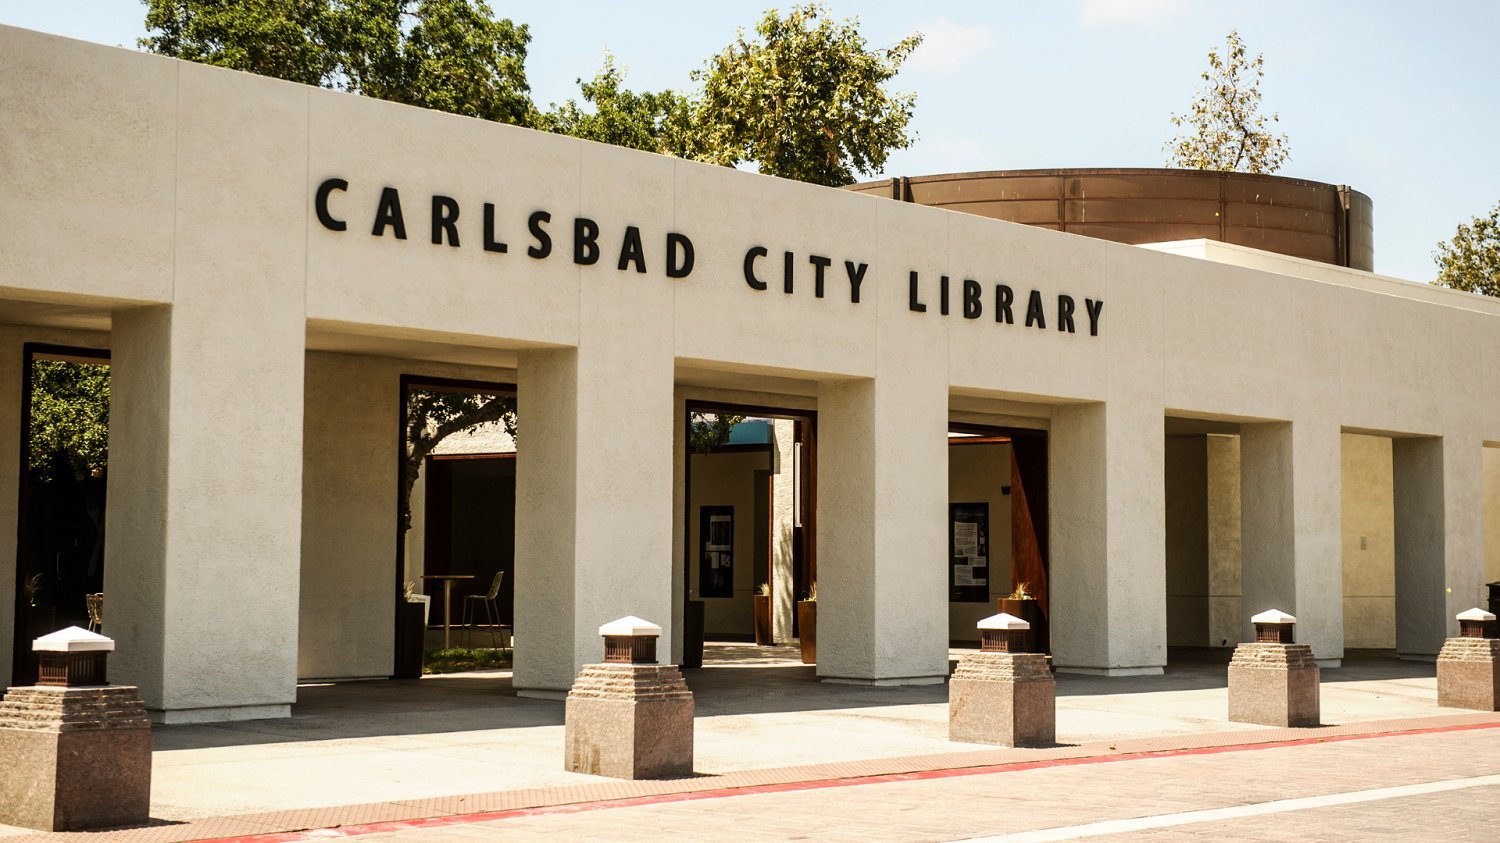 Fines for overdue items will be forgiven for all items that are returned back to the library. Courtesy photo/City of Carlsbad